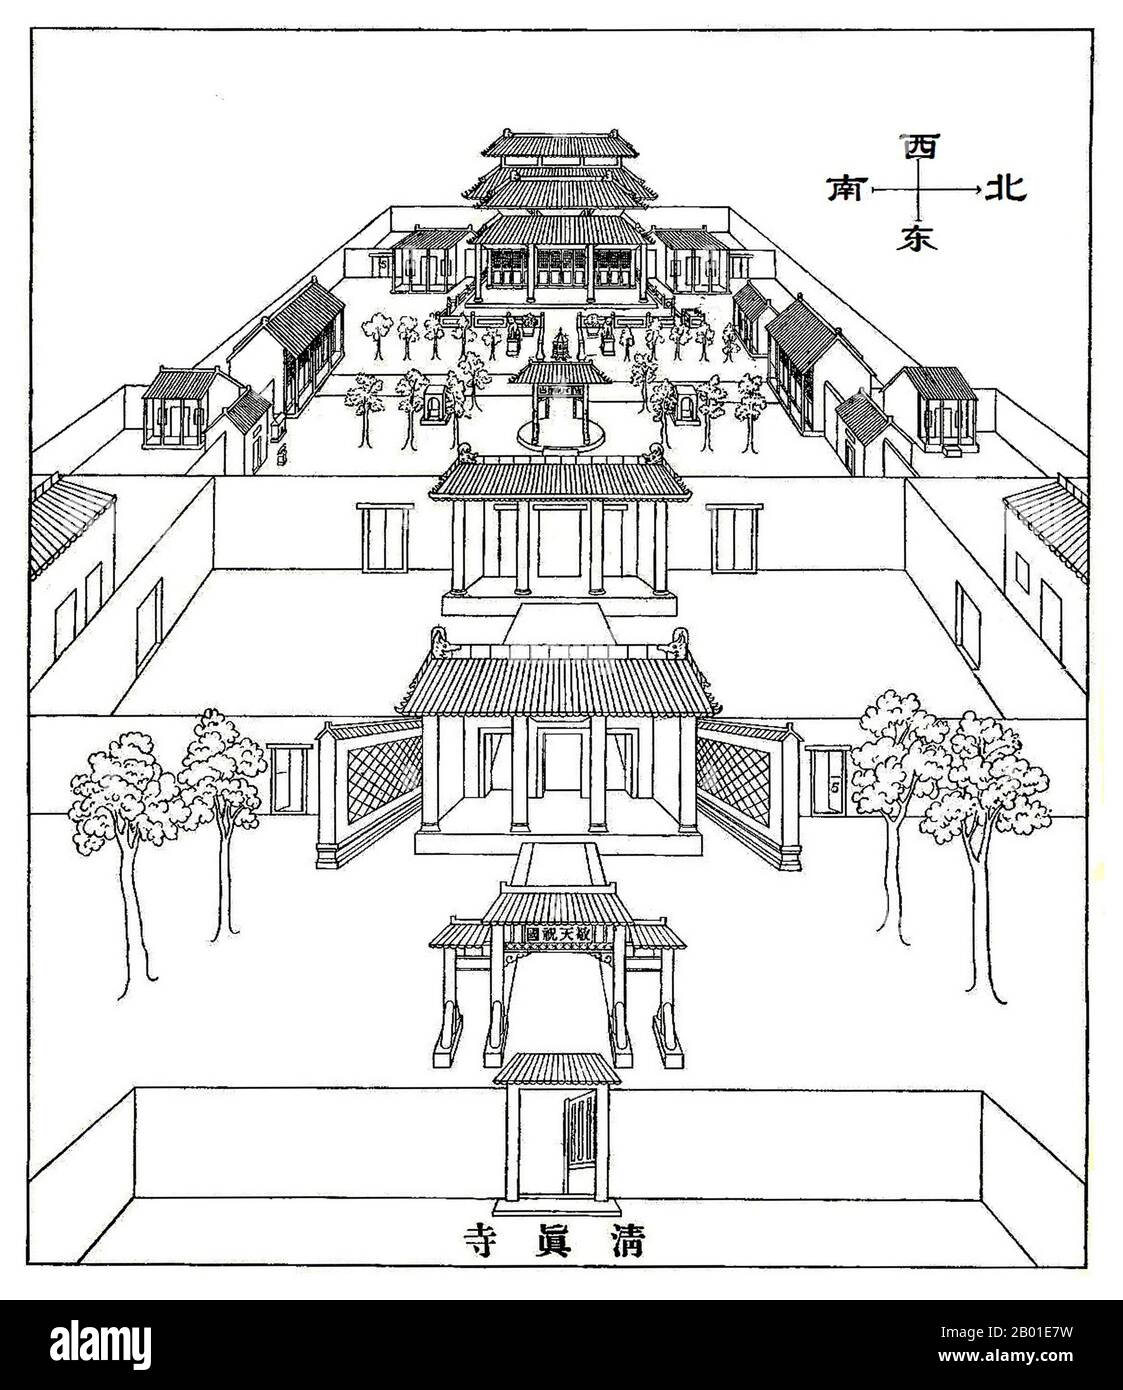 China: The Kaifeng synagogue based on a drawing by the Jesuit Père Jean Domange (1666-1735), 1722.  The Kaifeng Jews are members of a small Jewish community that has existed in Kaifeng, in the Henan province of China, for hundreds of years.  Jews in modern China have traditionally called themselves Youtai (from Judah) in Mandarin Chinese which is also the predominant contemporary Chinese language term for Jews in general. However, the community was known by their Han Chinese neighbors as adherents of Tiaojinjiao, meaning, loosely, the religion which removes the sinew (a reference to kashrut). Stock Photo